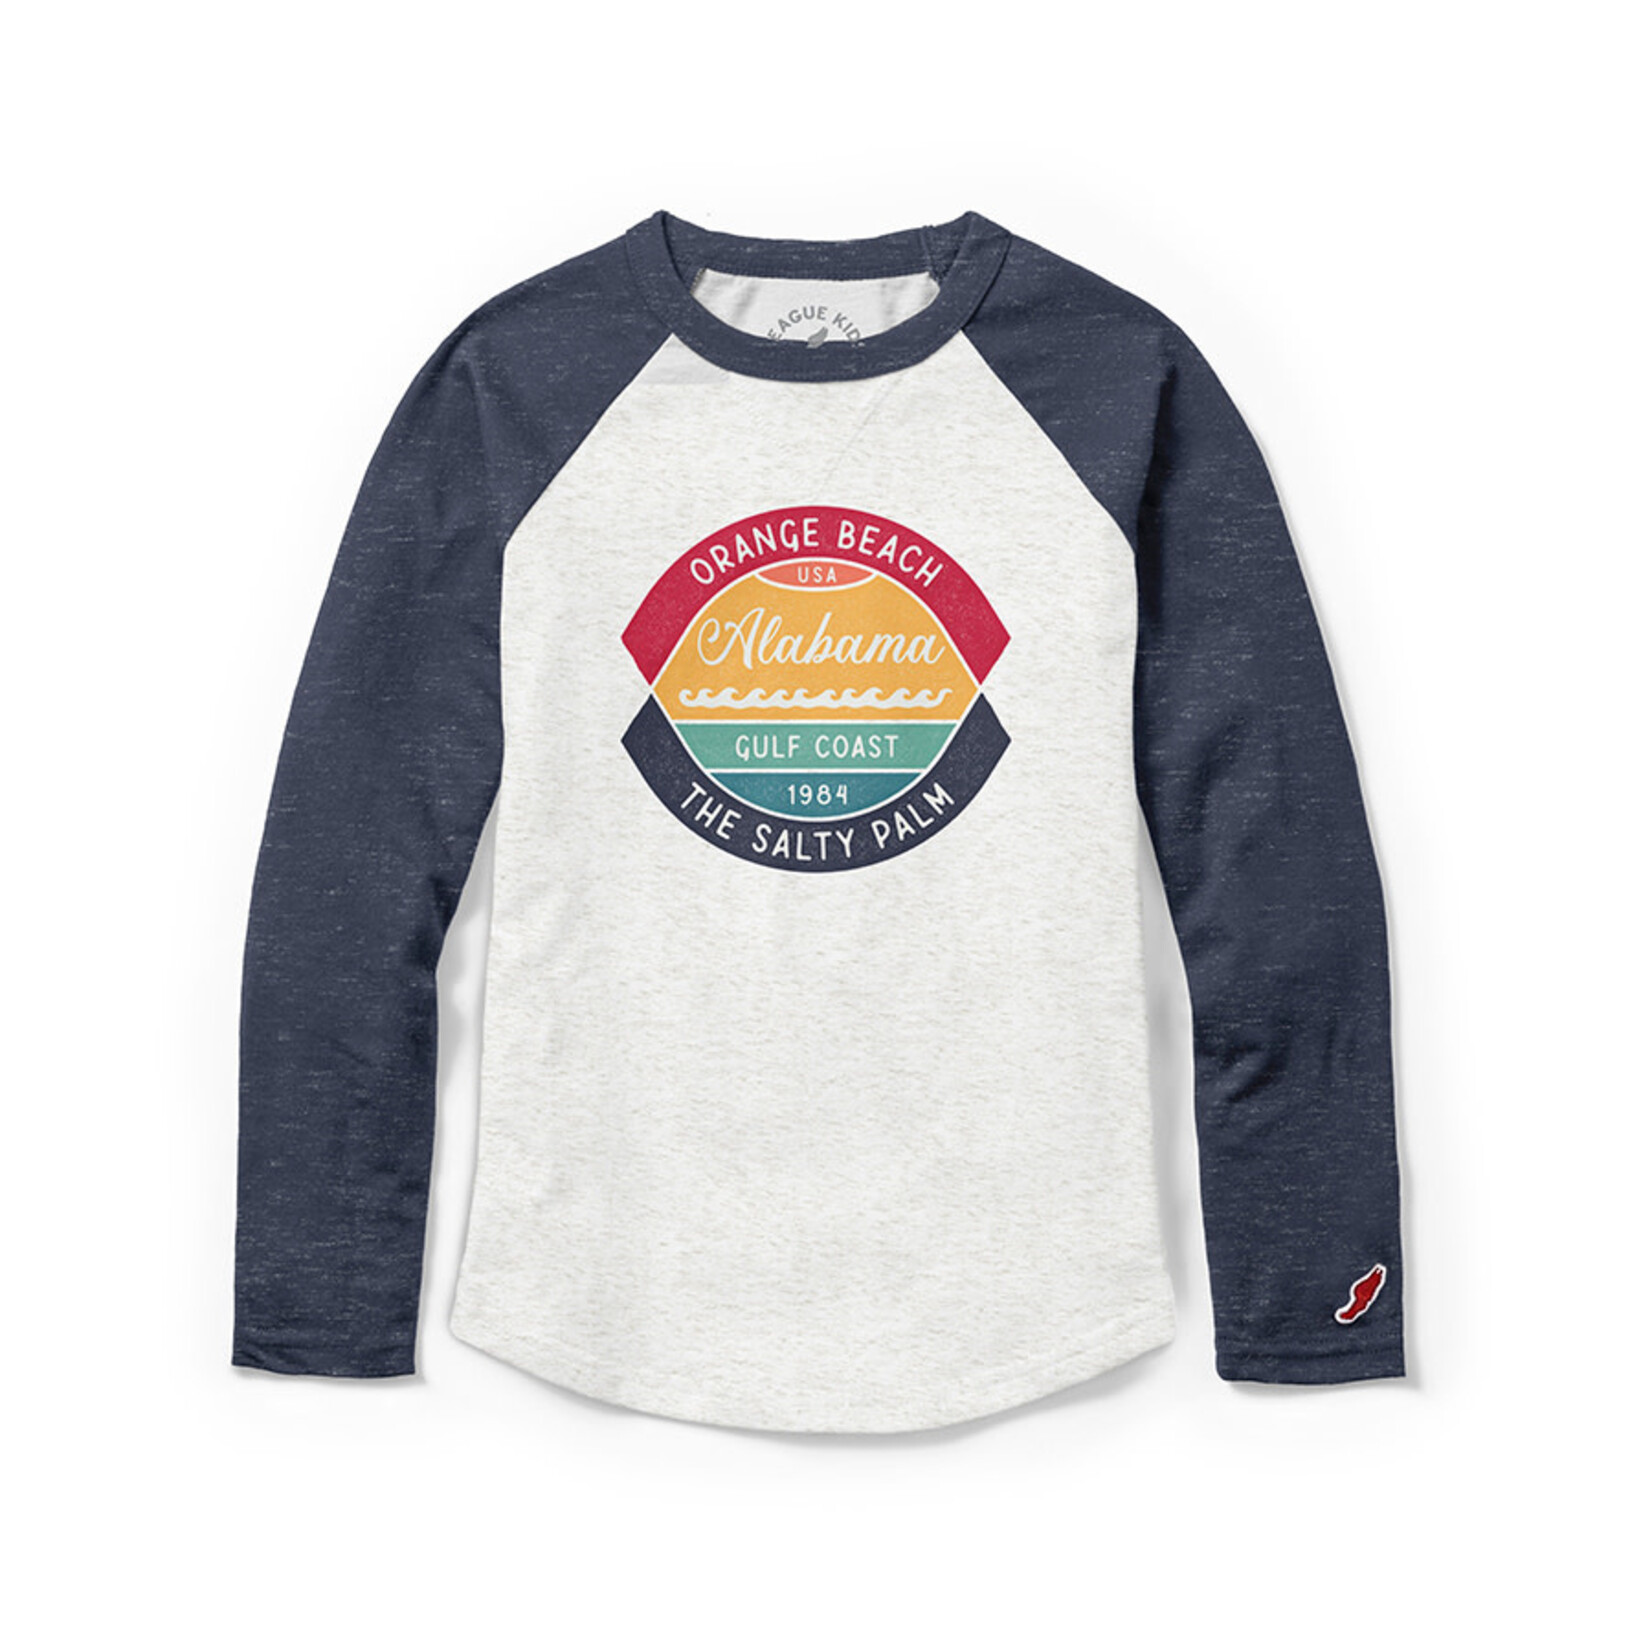 L2 Brands Youth Colorful Baseball Tee